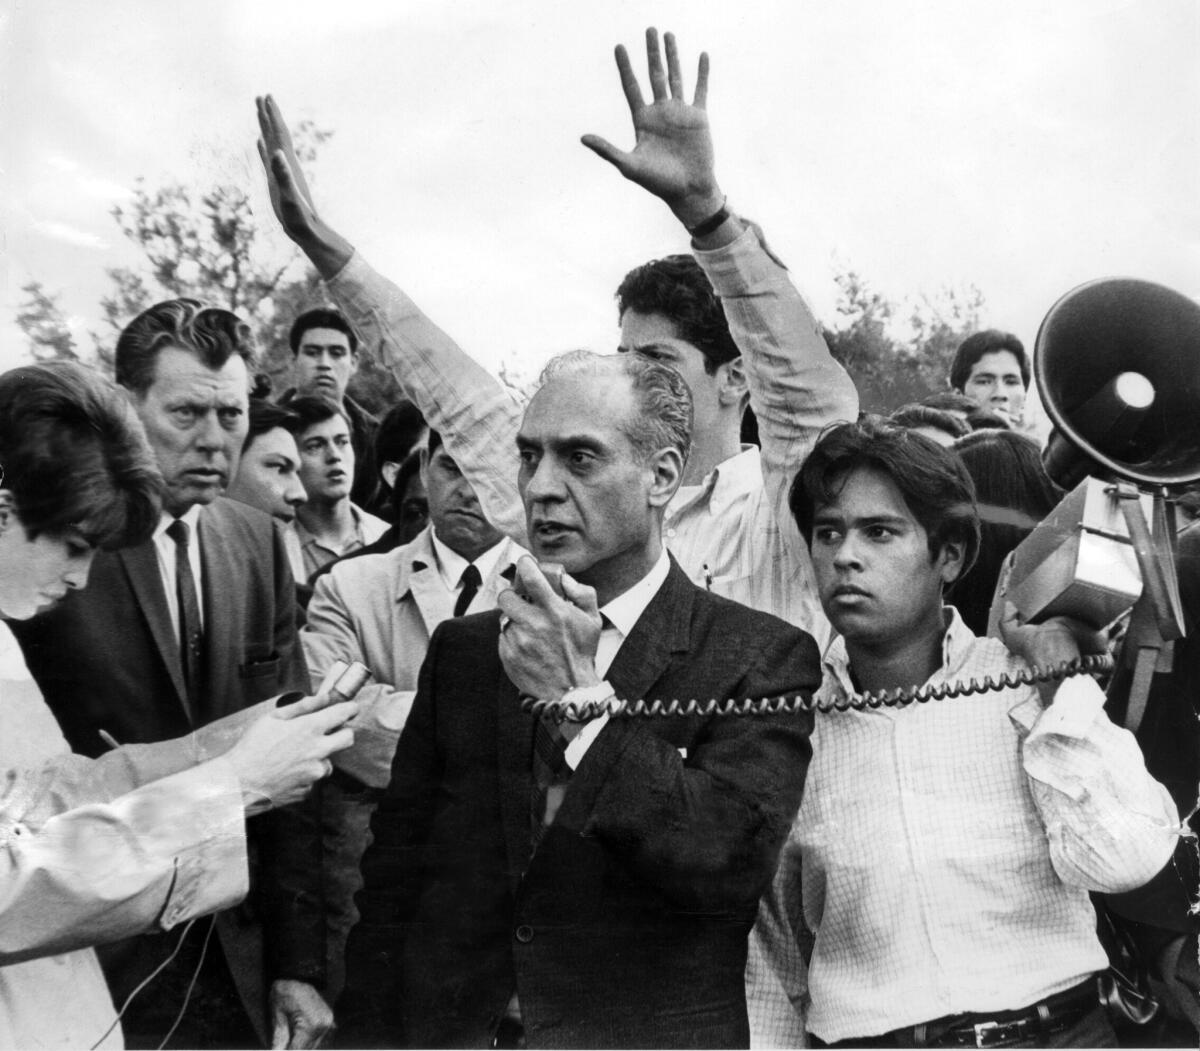 Edward R. Roybal with students in 1968